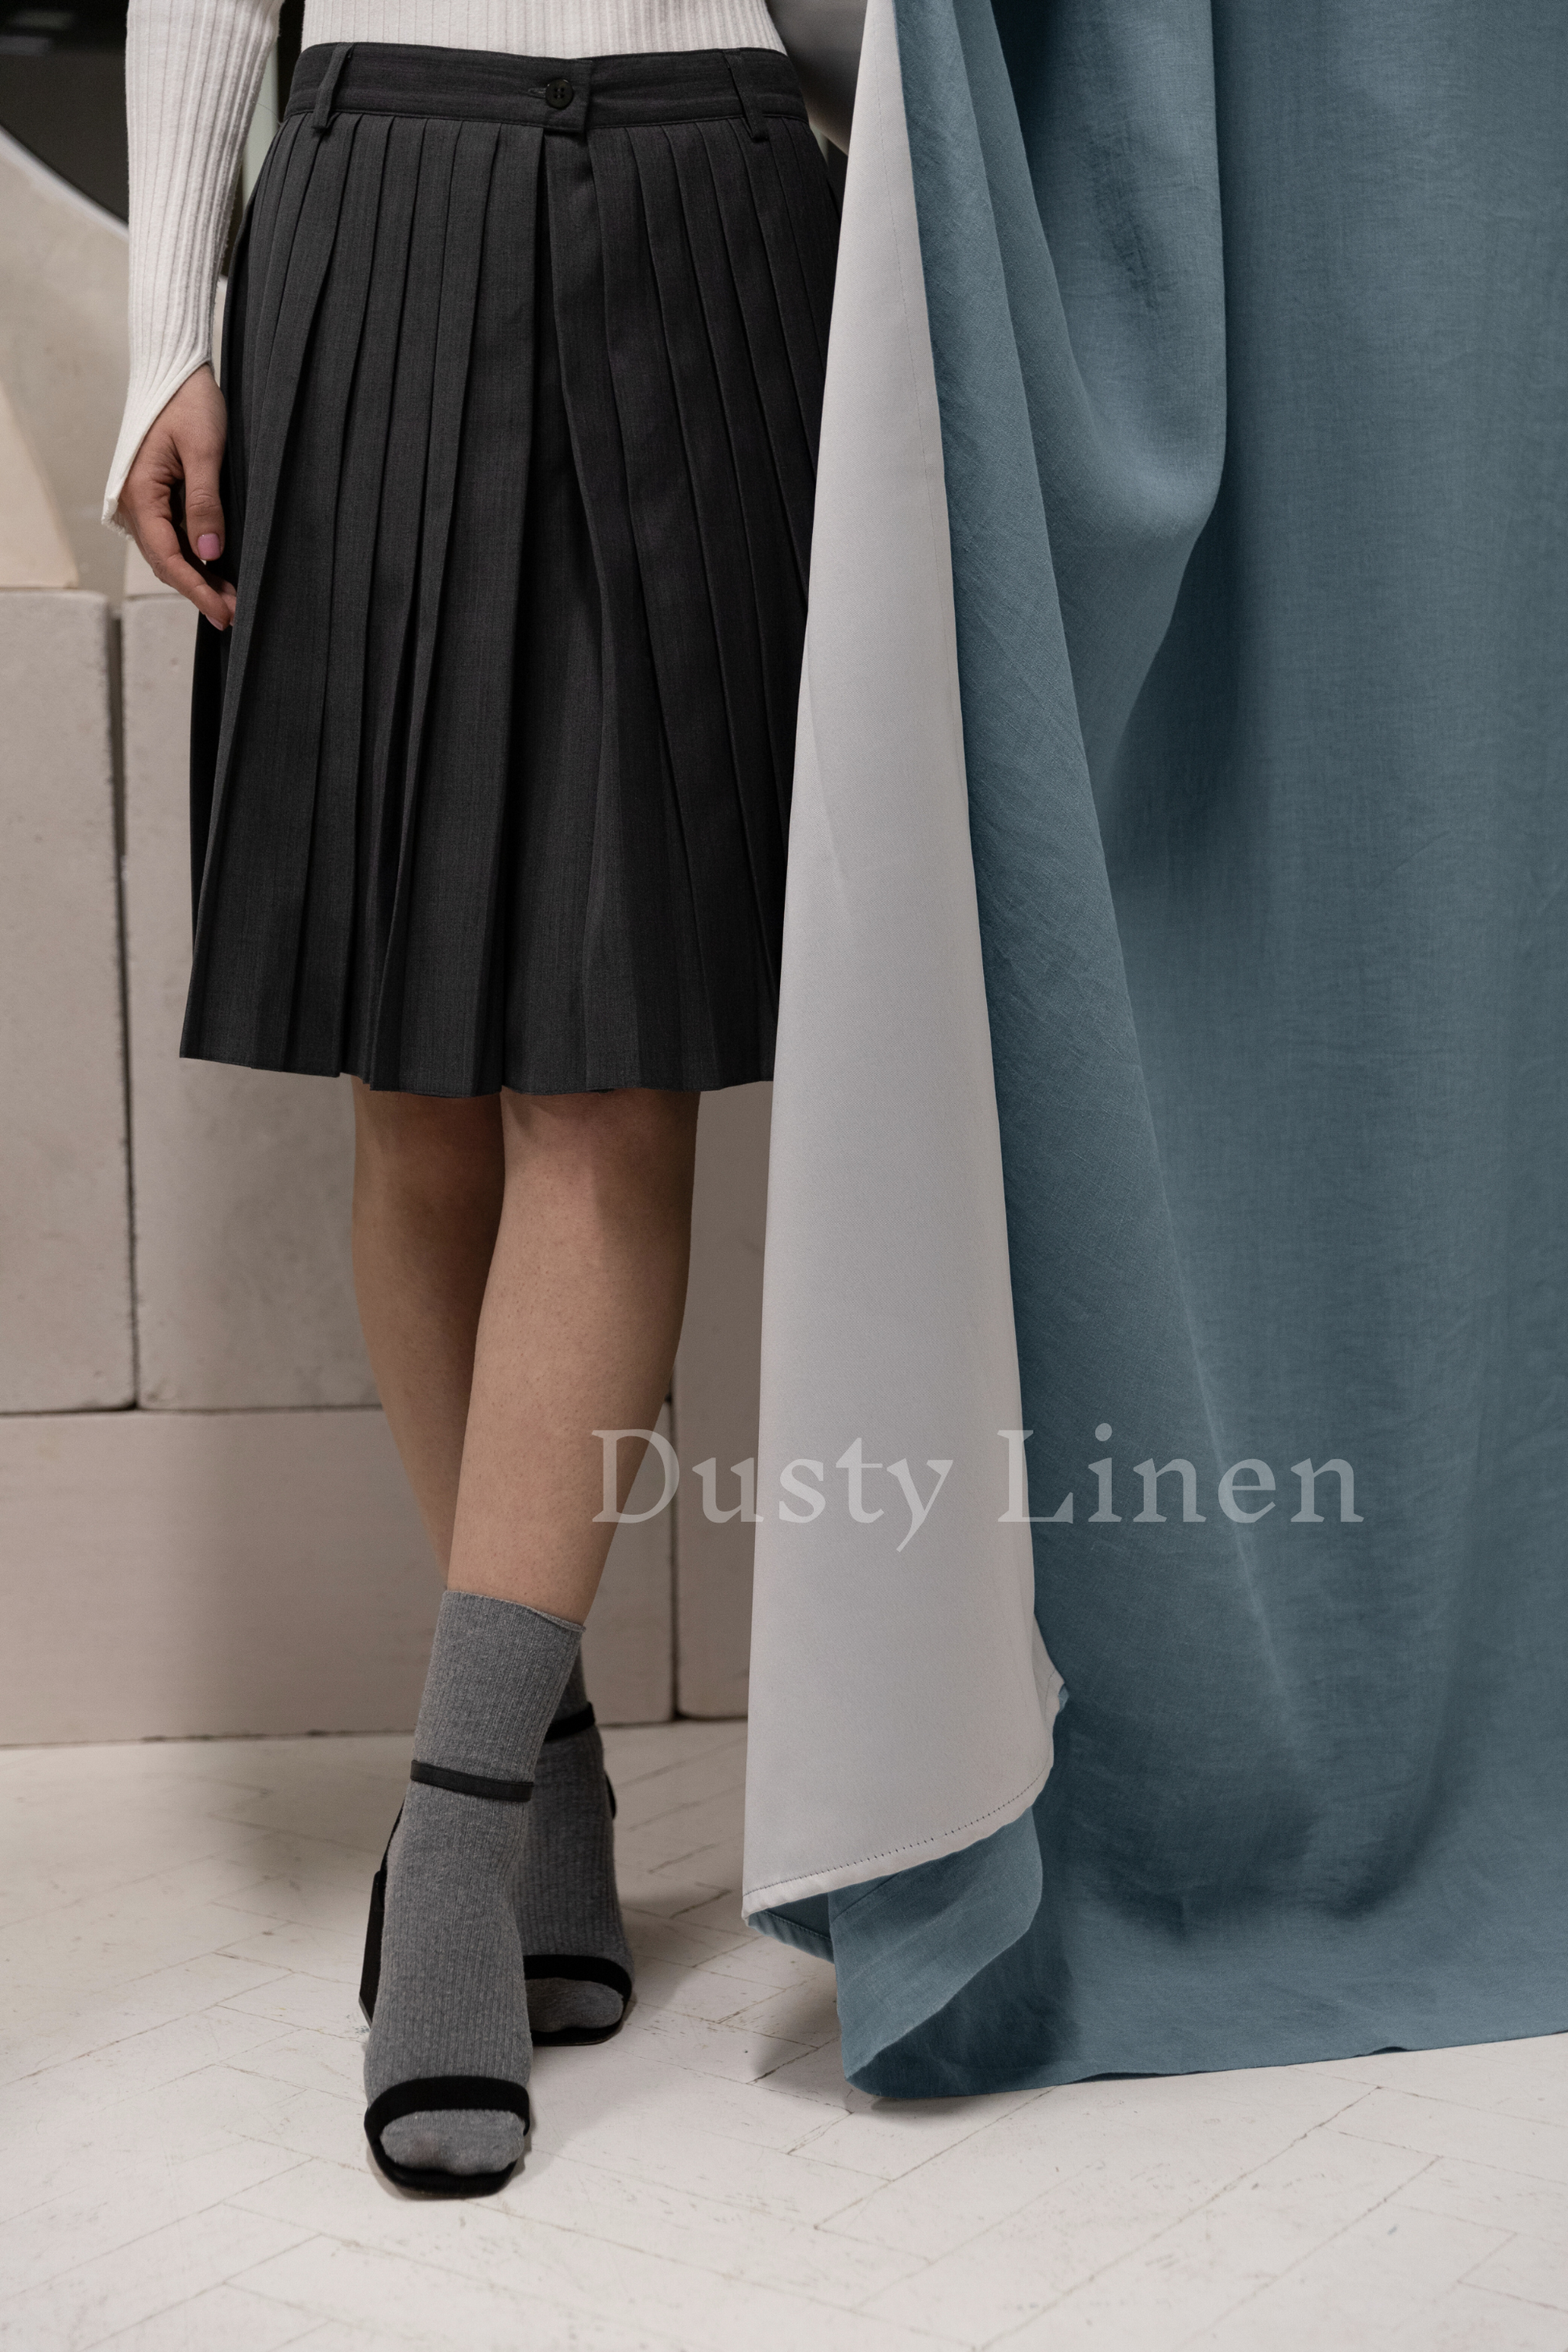 a woman standing next to a curtain wearing a skirt